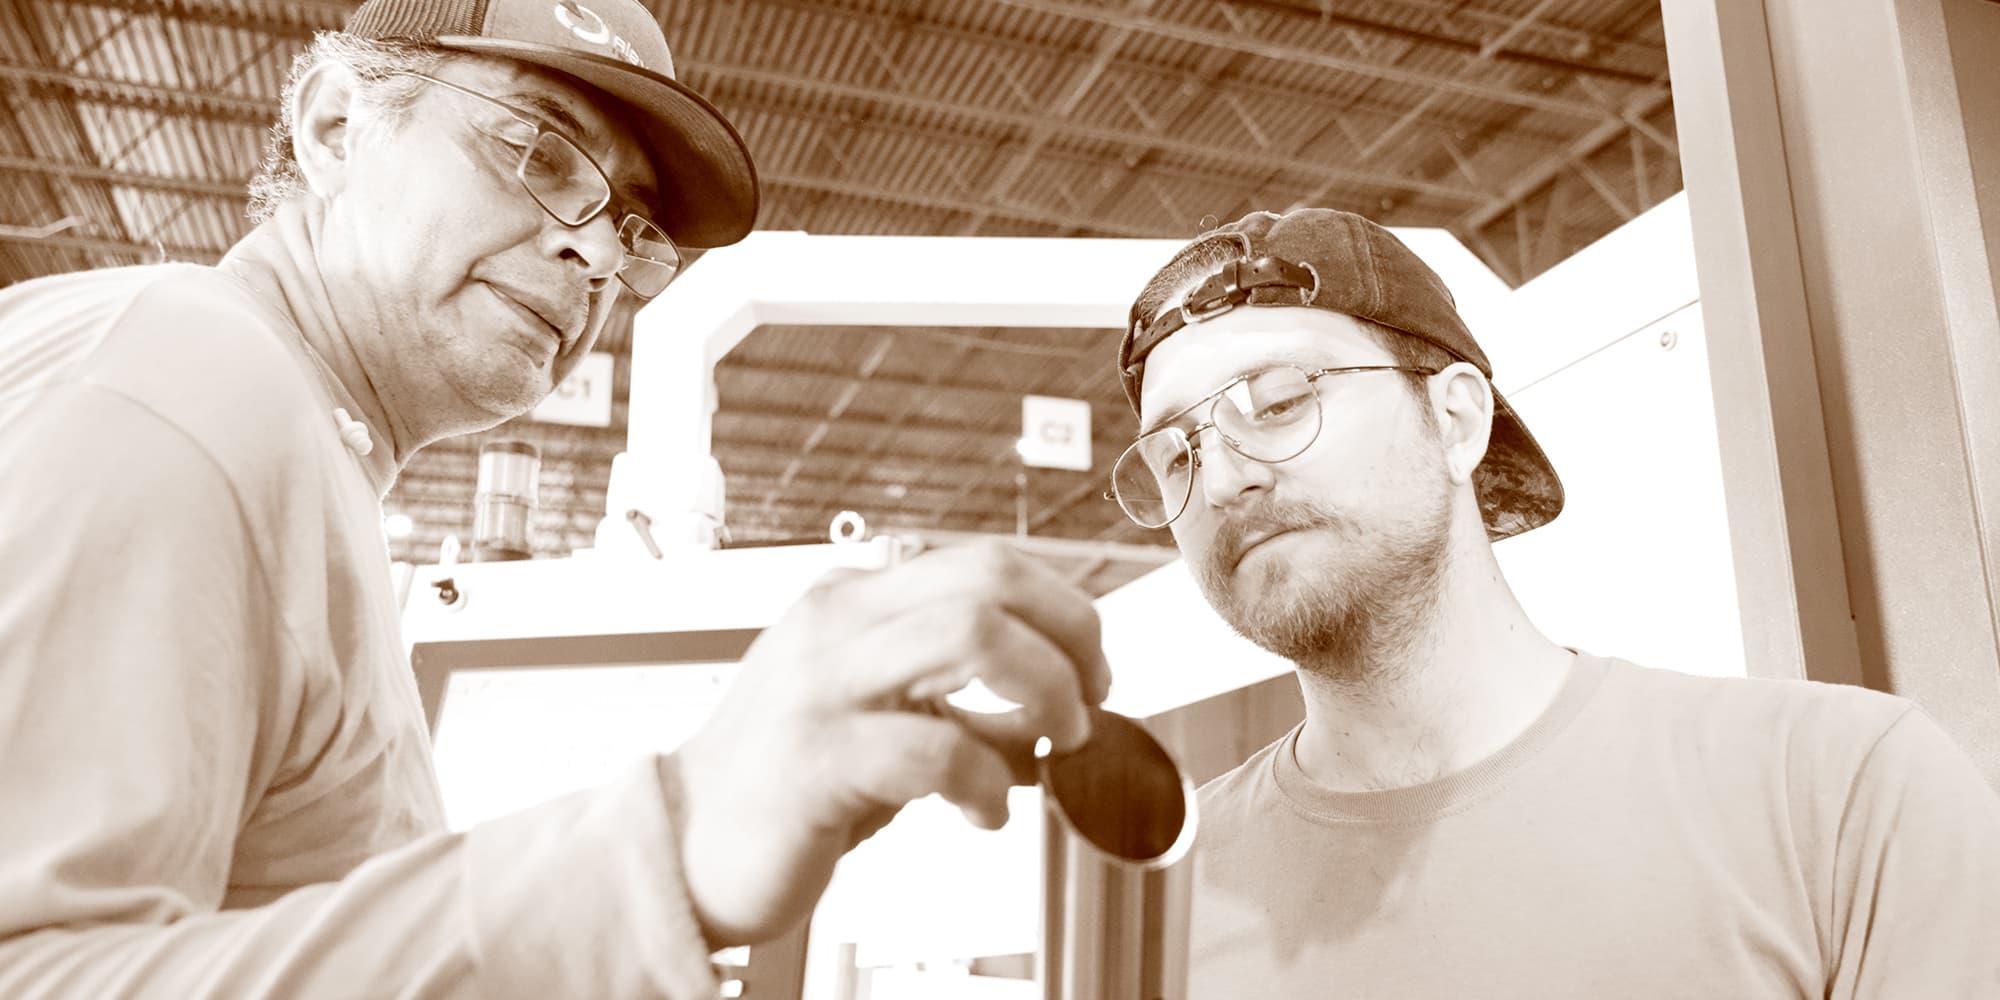 We put our products through rigorous inspection and testing procedures to ensure that only the highest quality products are fabricated and installed.